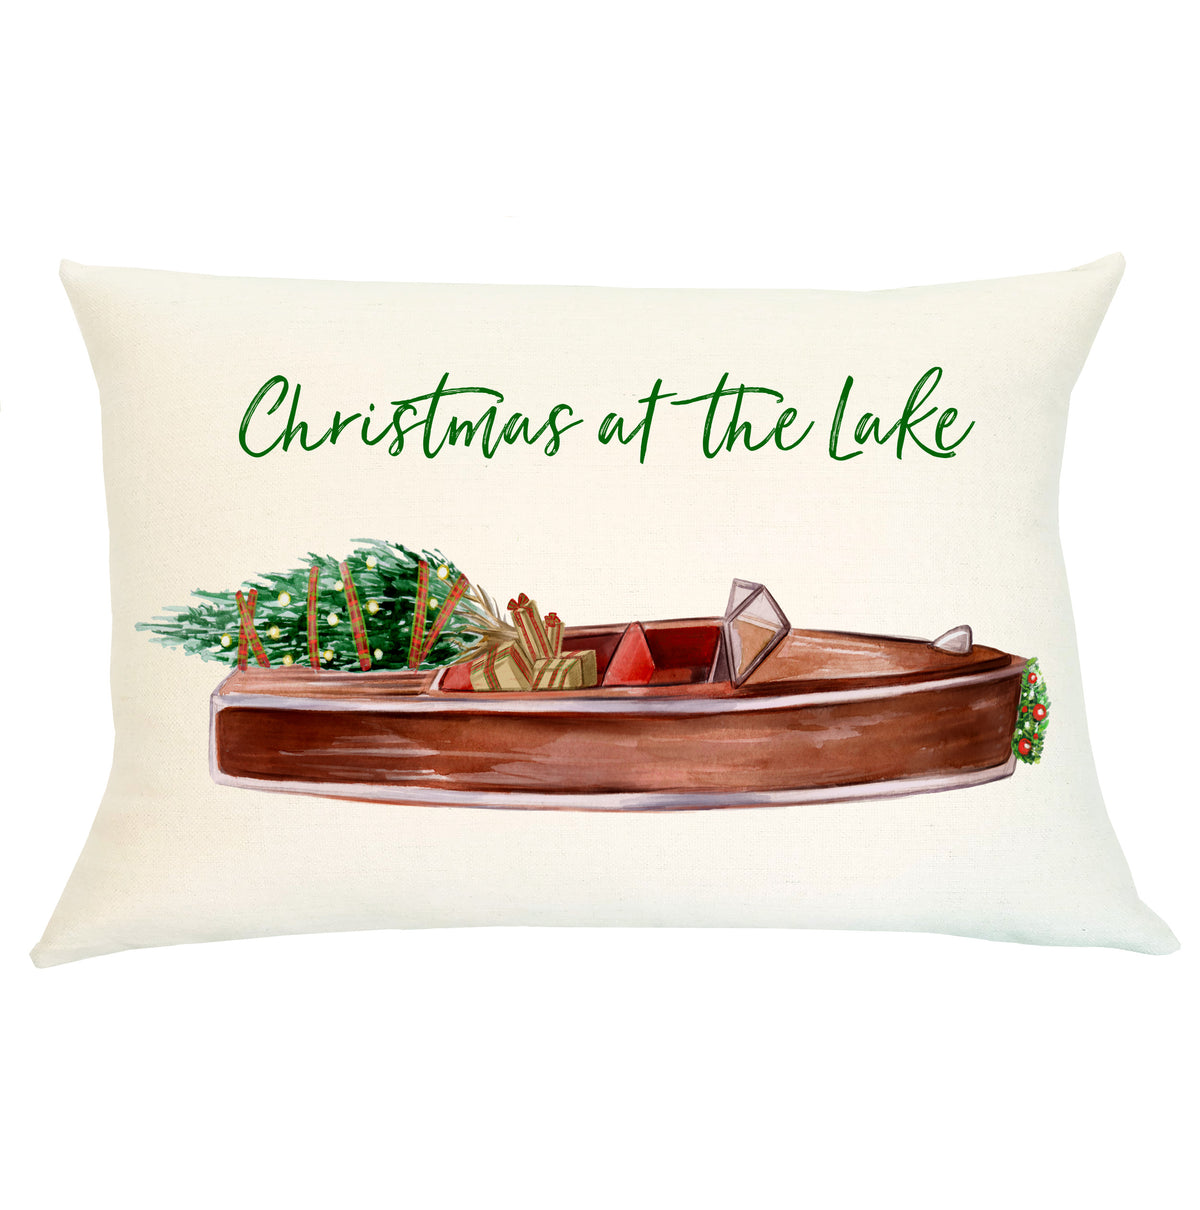 Pillow Lumbar - Christmas at the Lake - Insert Included